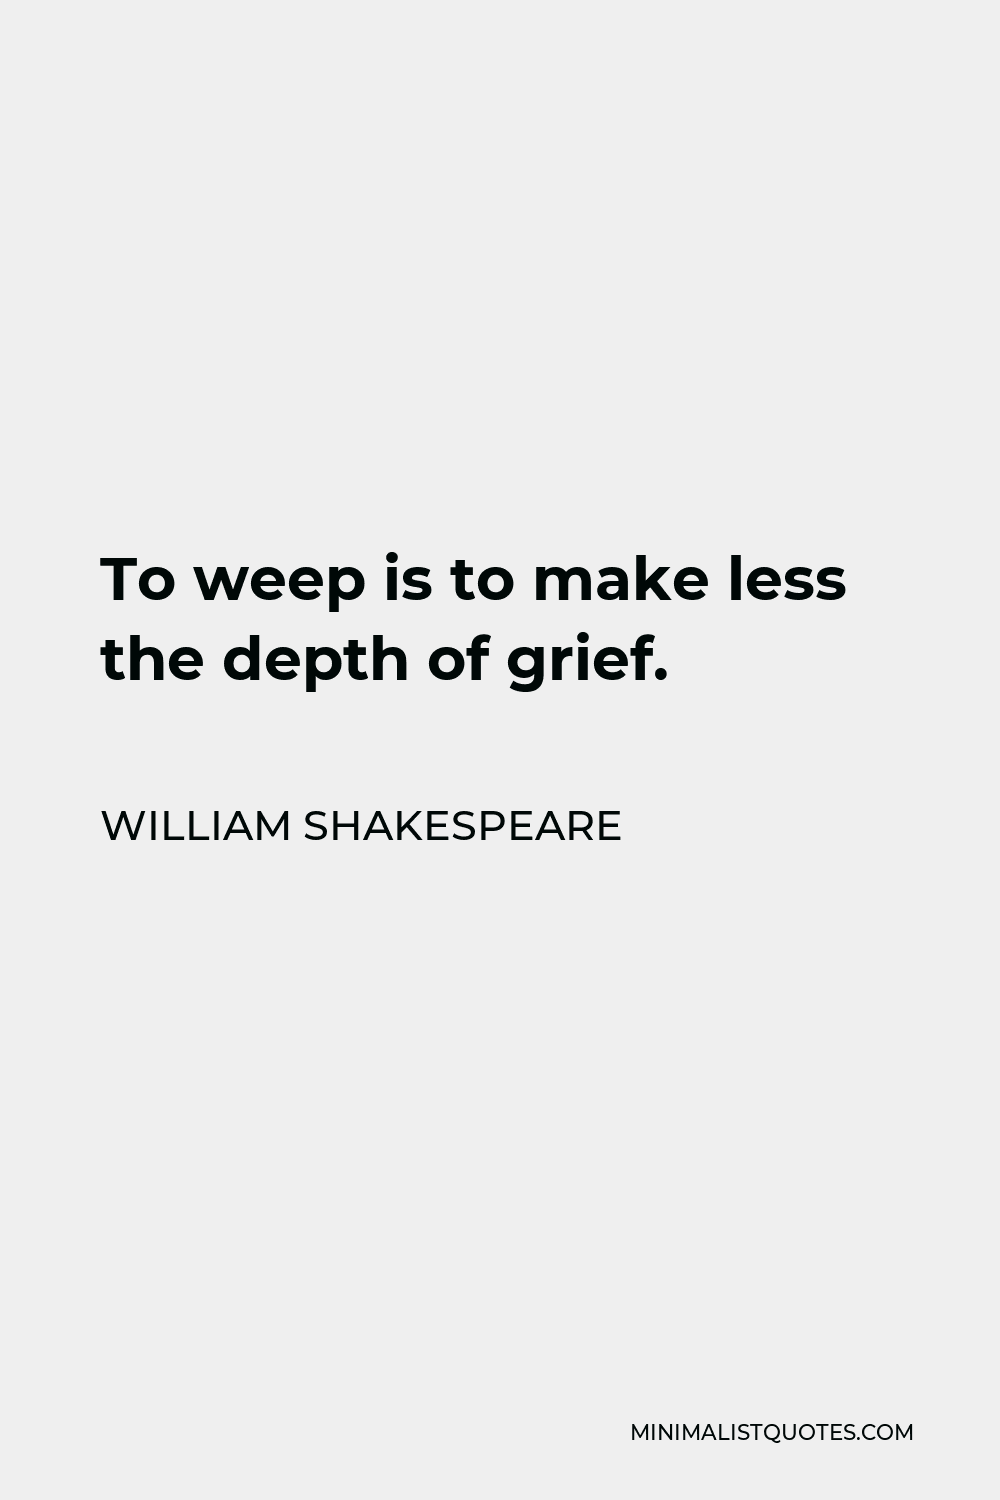 William Shakespeare Quote: To weep is to make less the depth of grief.